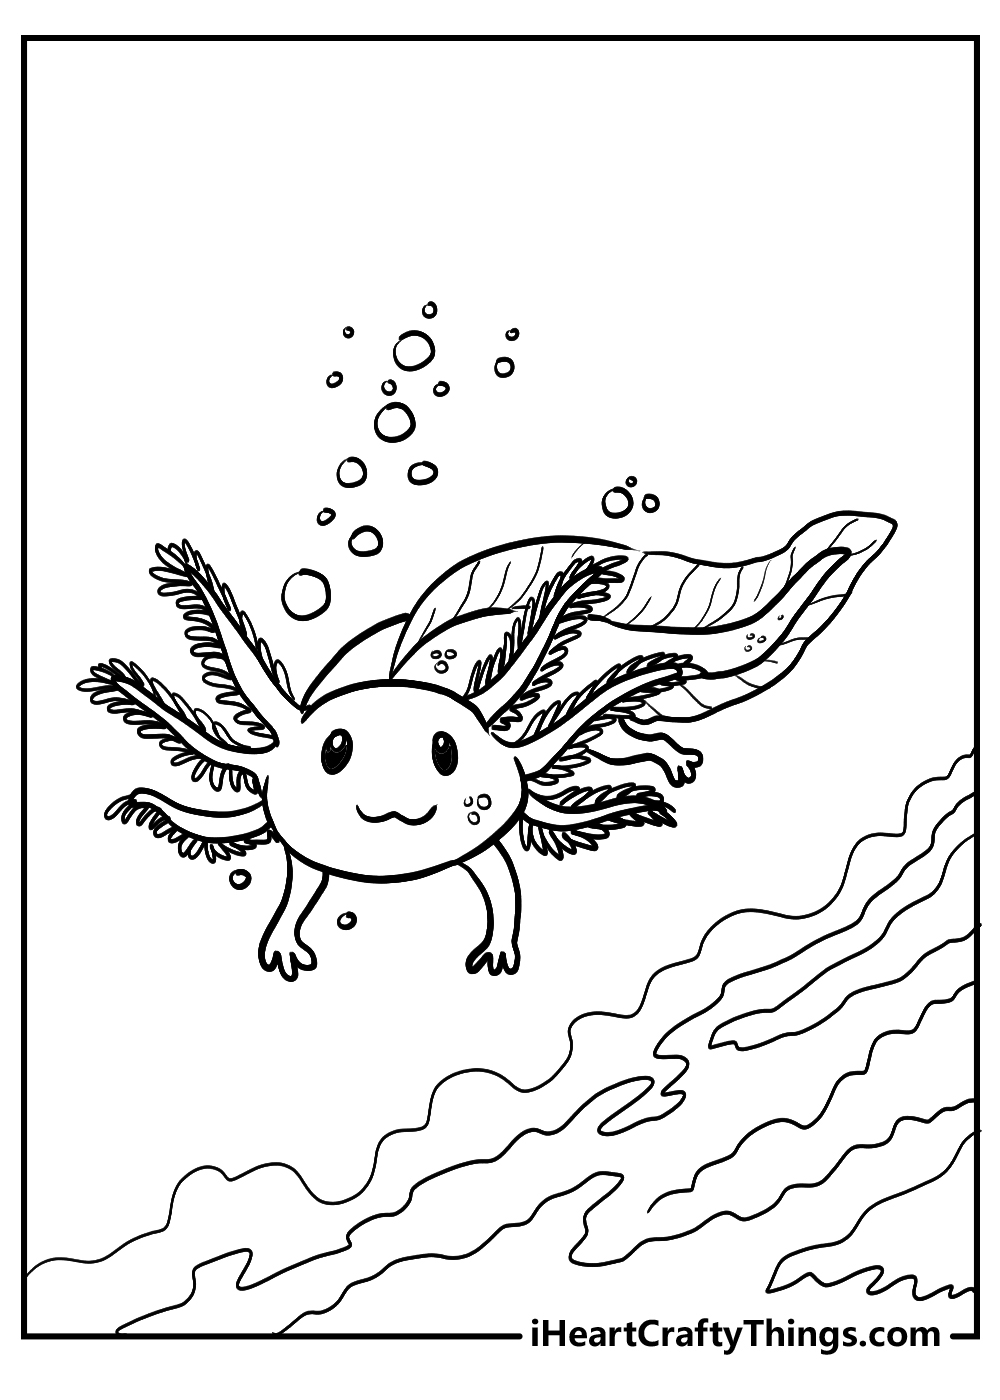 white axolotl coloring pages